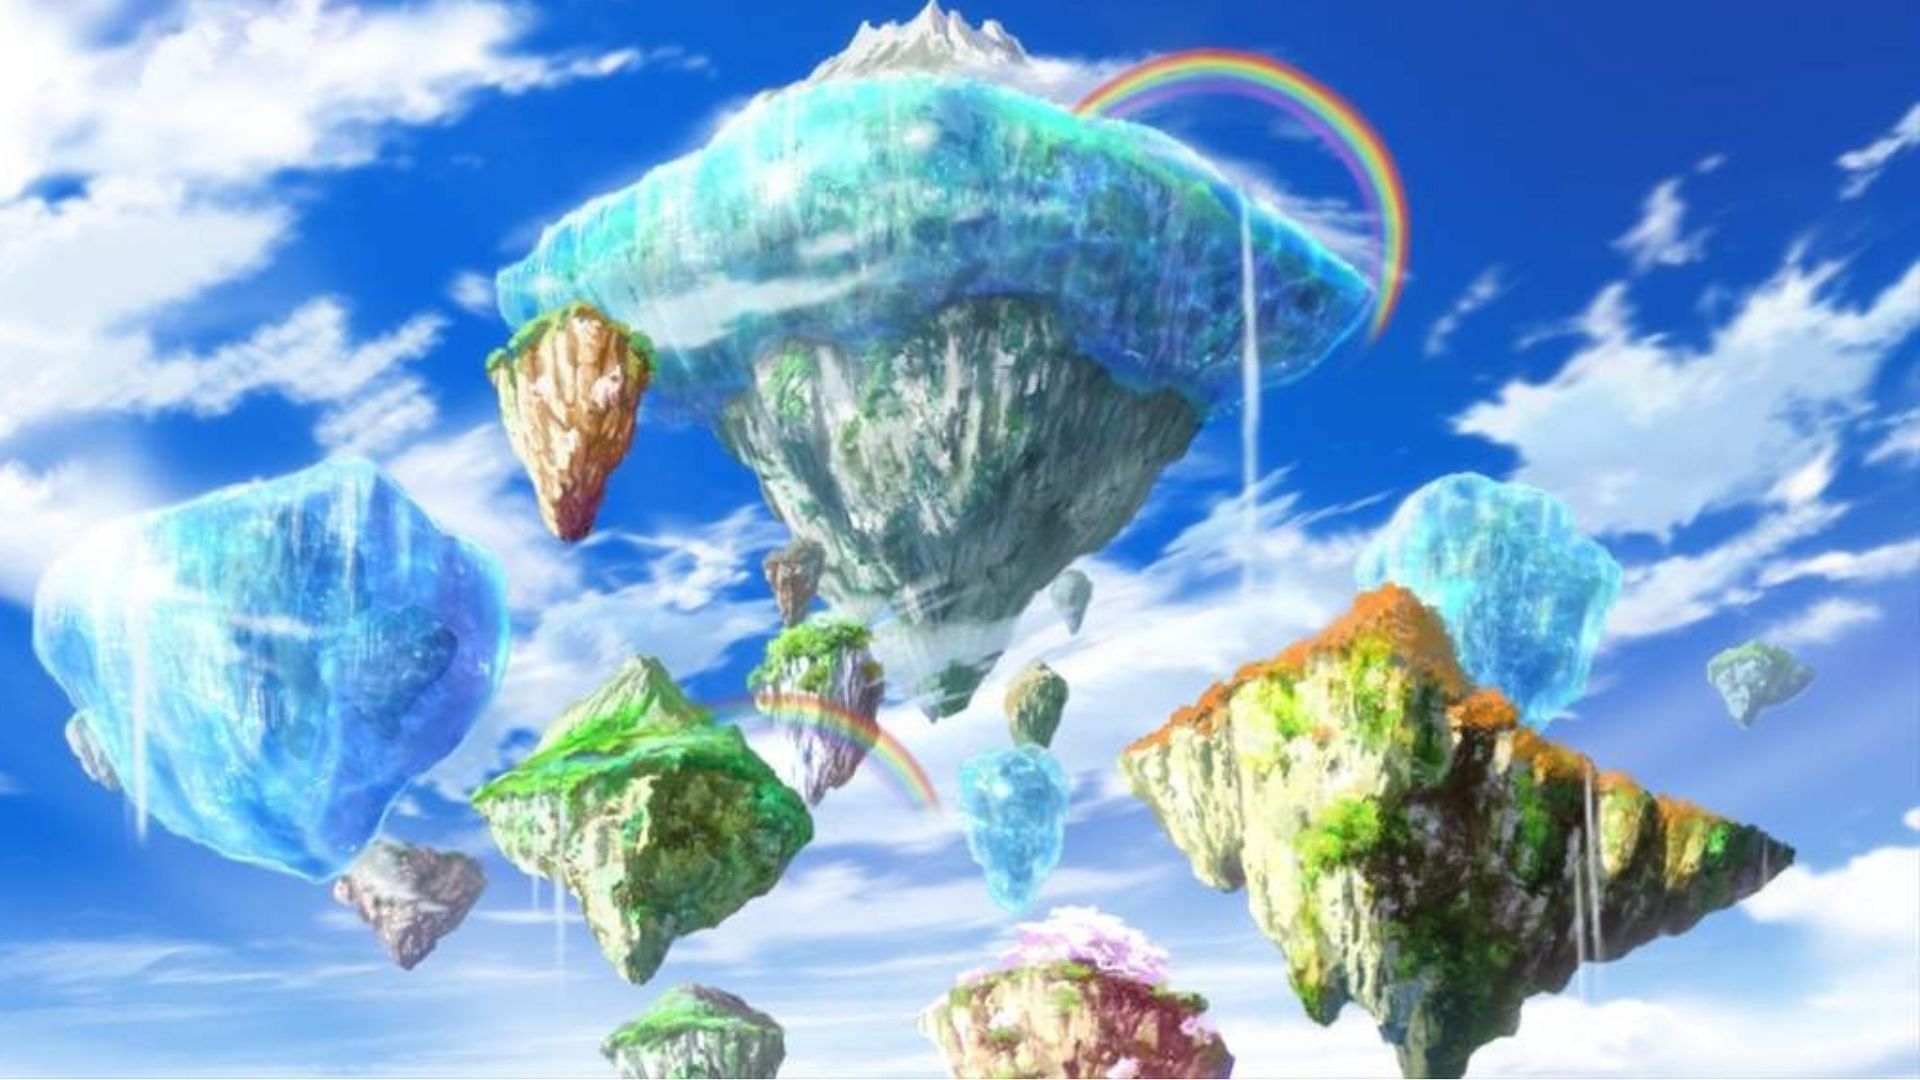 This anime world comprises of many Sky Islands (Image via Toei Animation)